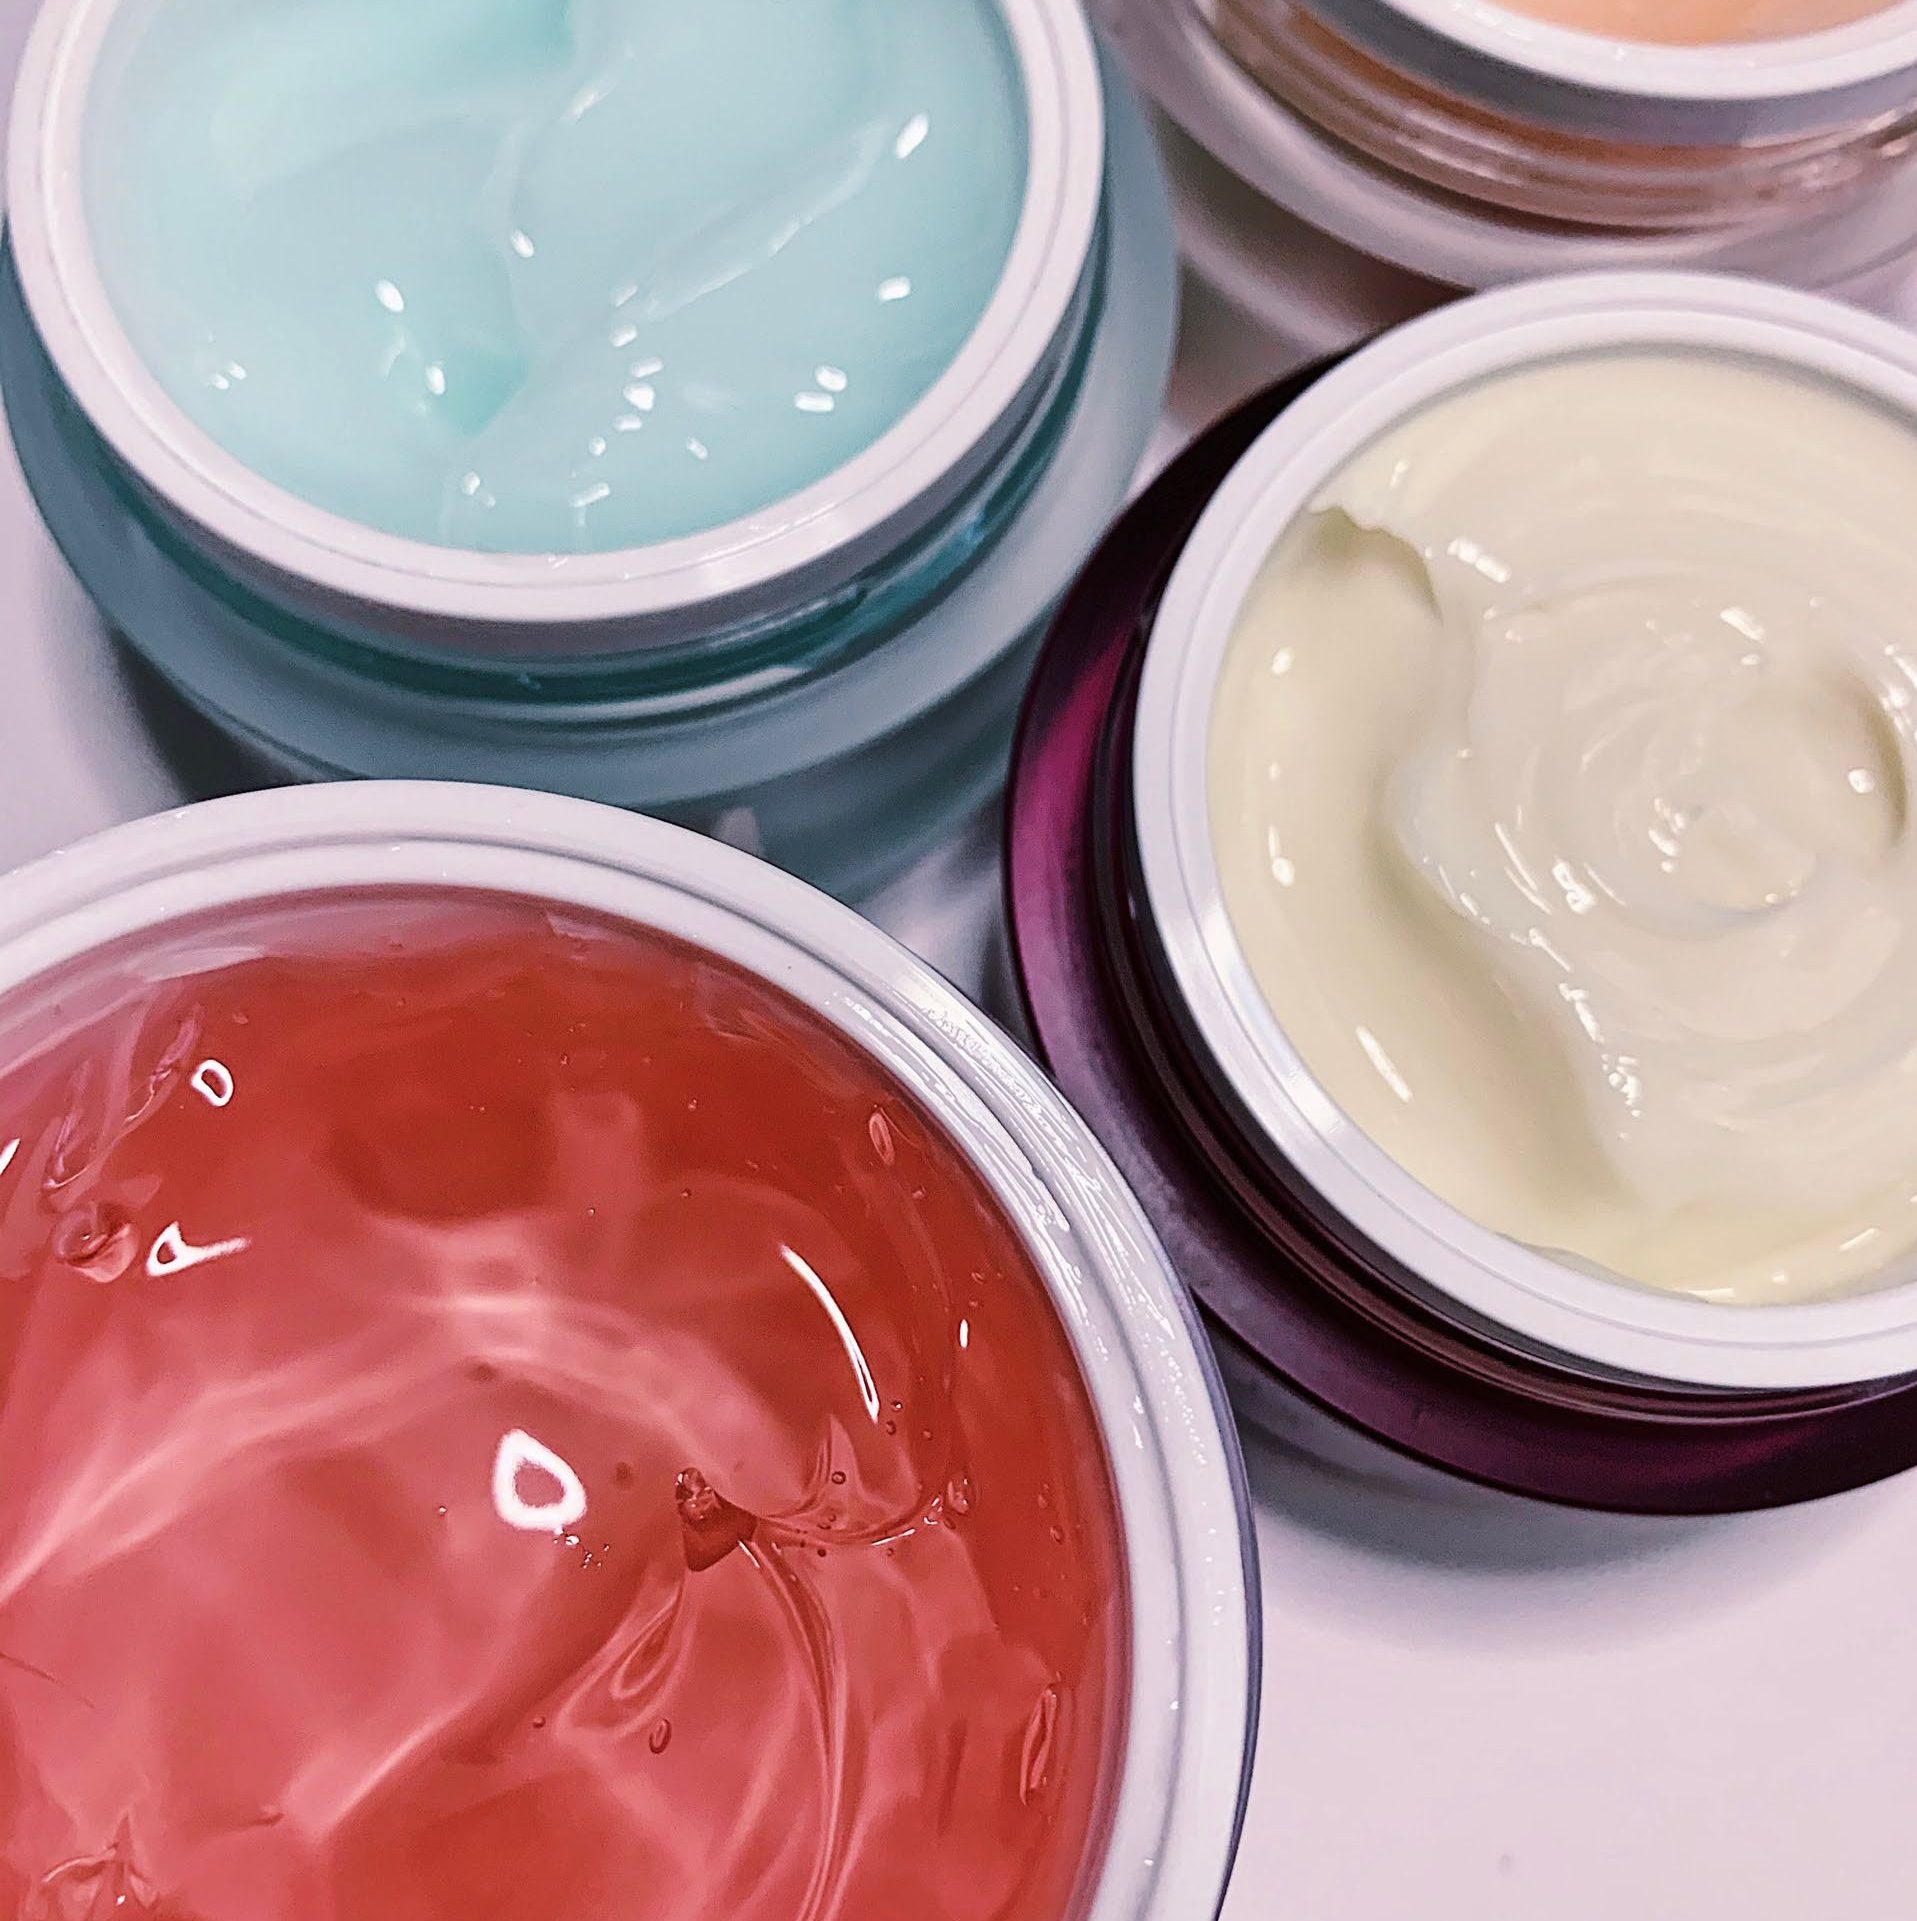 A photo of four moisturizers from Thank You Farmer. A mix of gel moisturizers, creams, and lotion textures.